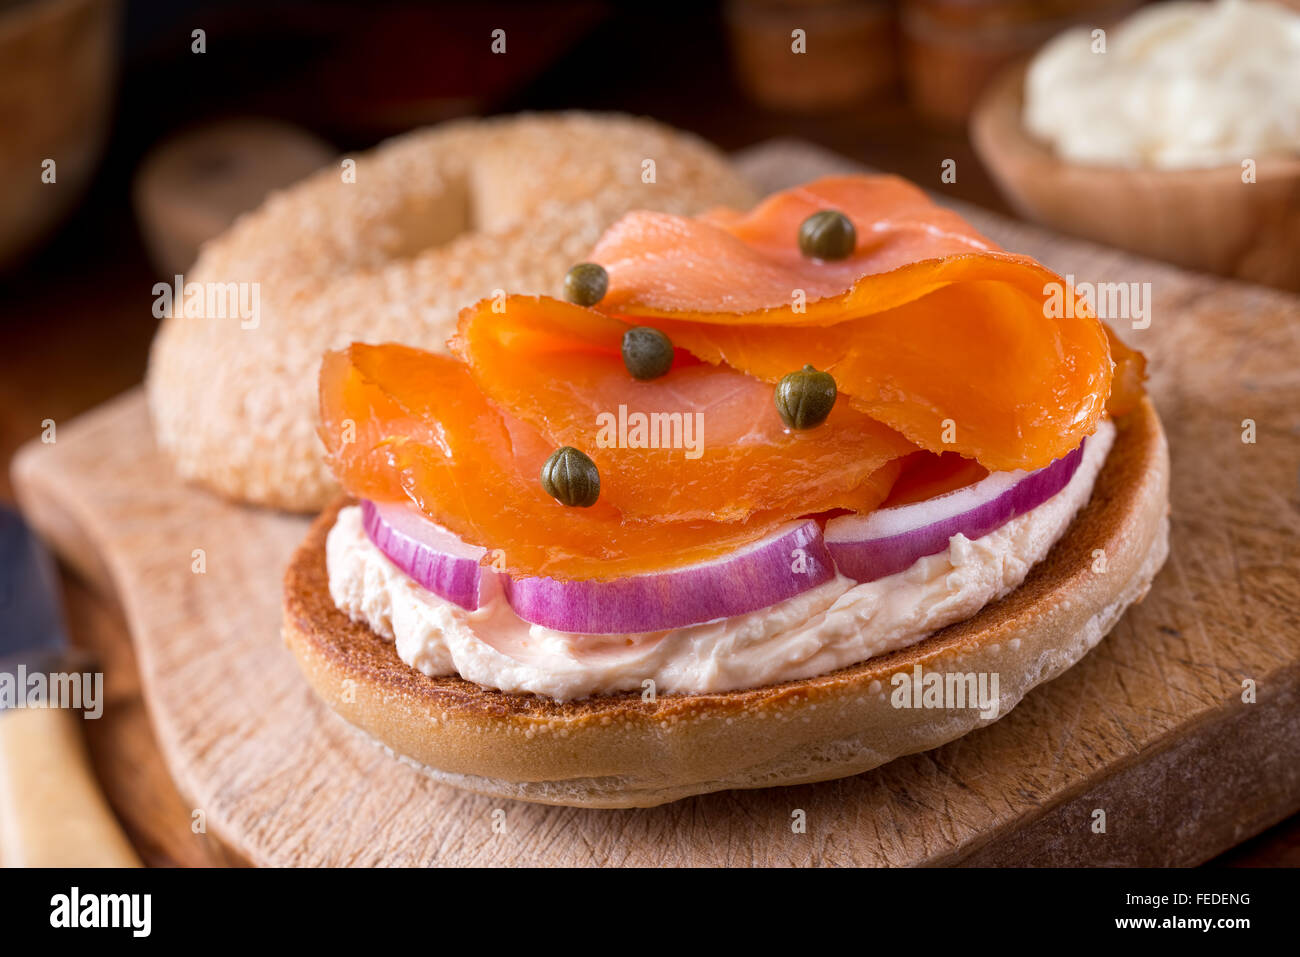 A delicious homemade toasted sesame seed bagel with smoked salmon, whipped cream cheese, red onion, and capers. Stock Photo